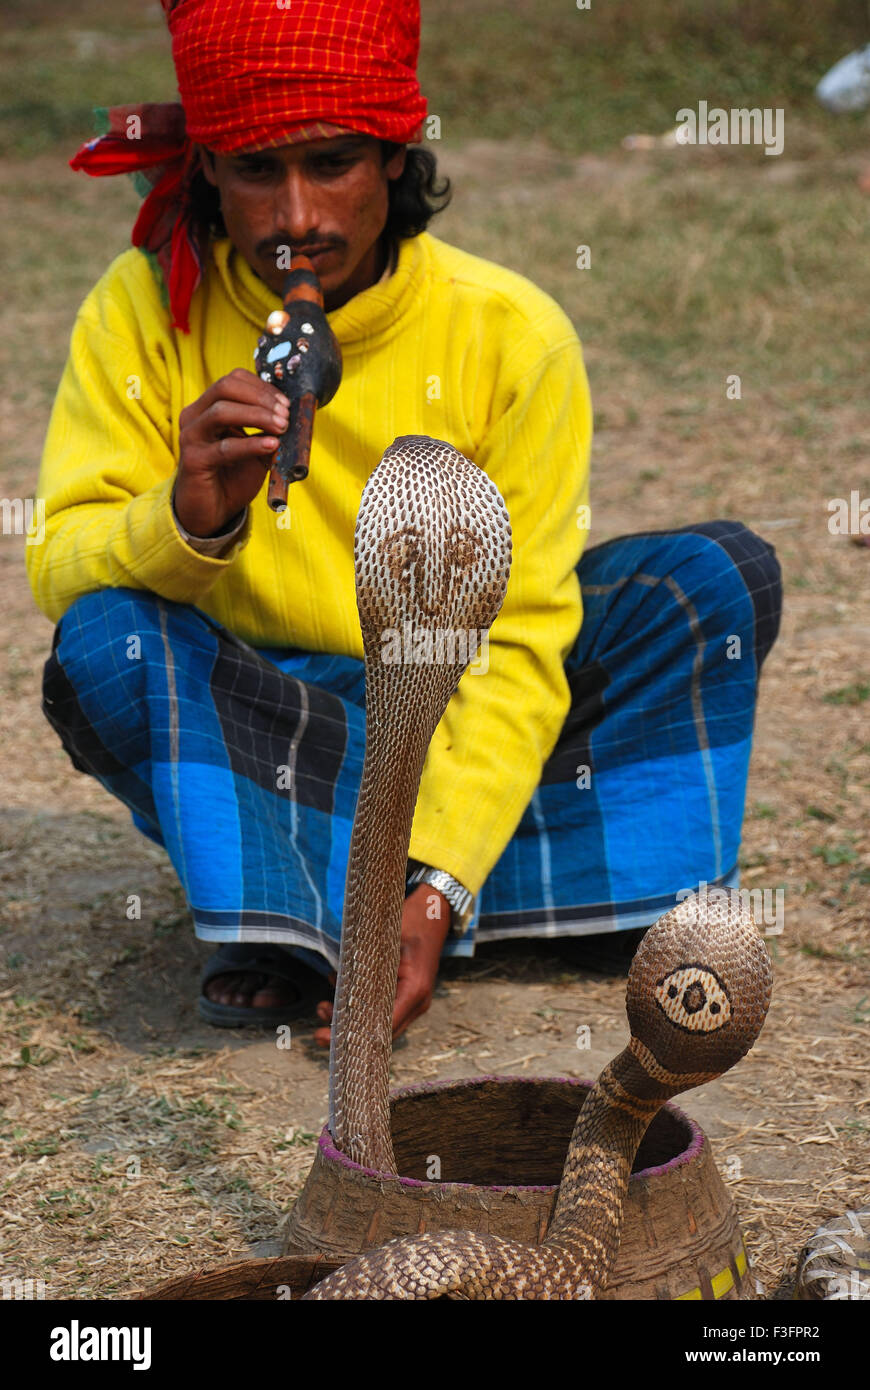 Snake charmer playing pungi in front of snakes Stock Photo